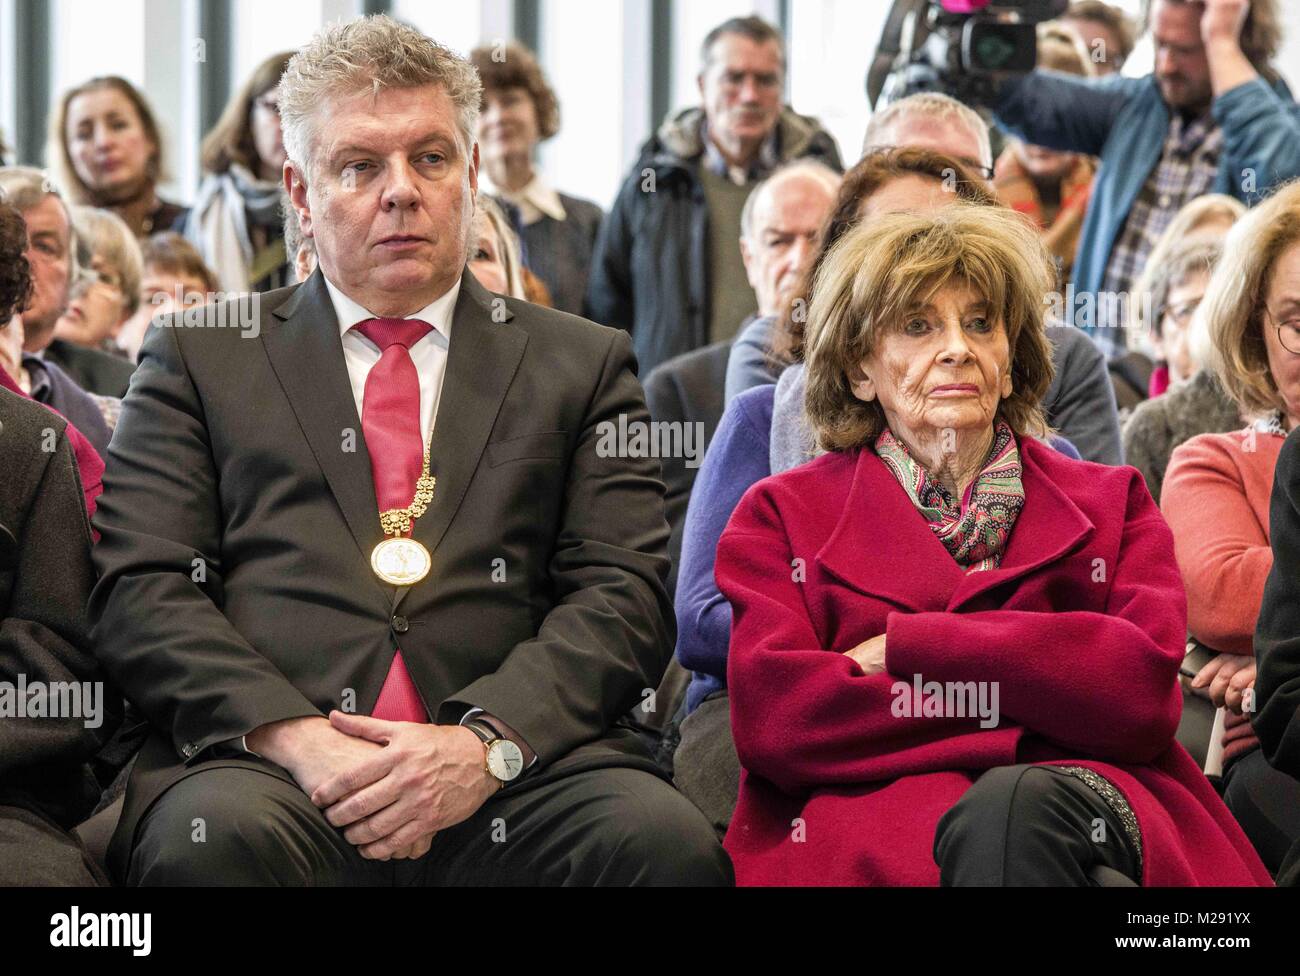 Munich, Bavaria, Germany. 6th Feb, 2018. Munich Mayor Dieter Reiter seated next to Holocaust survivor Charlotte Knoblauch. The City of Munich, Germany dedicated the plaza adjacent to the National Socialism Documentation Center (NS-Dokumentationszentrum) building to Holocaust survivor Max Mannheimer. Mannheimer was an author, painter, and prolific speaker about the experience. He and his brother were the only family members to survive. Credit: ZUMA Press, Inc./Alamy Live News Stock Photo